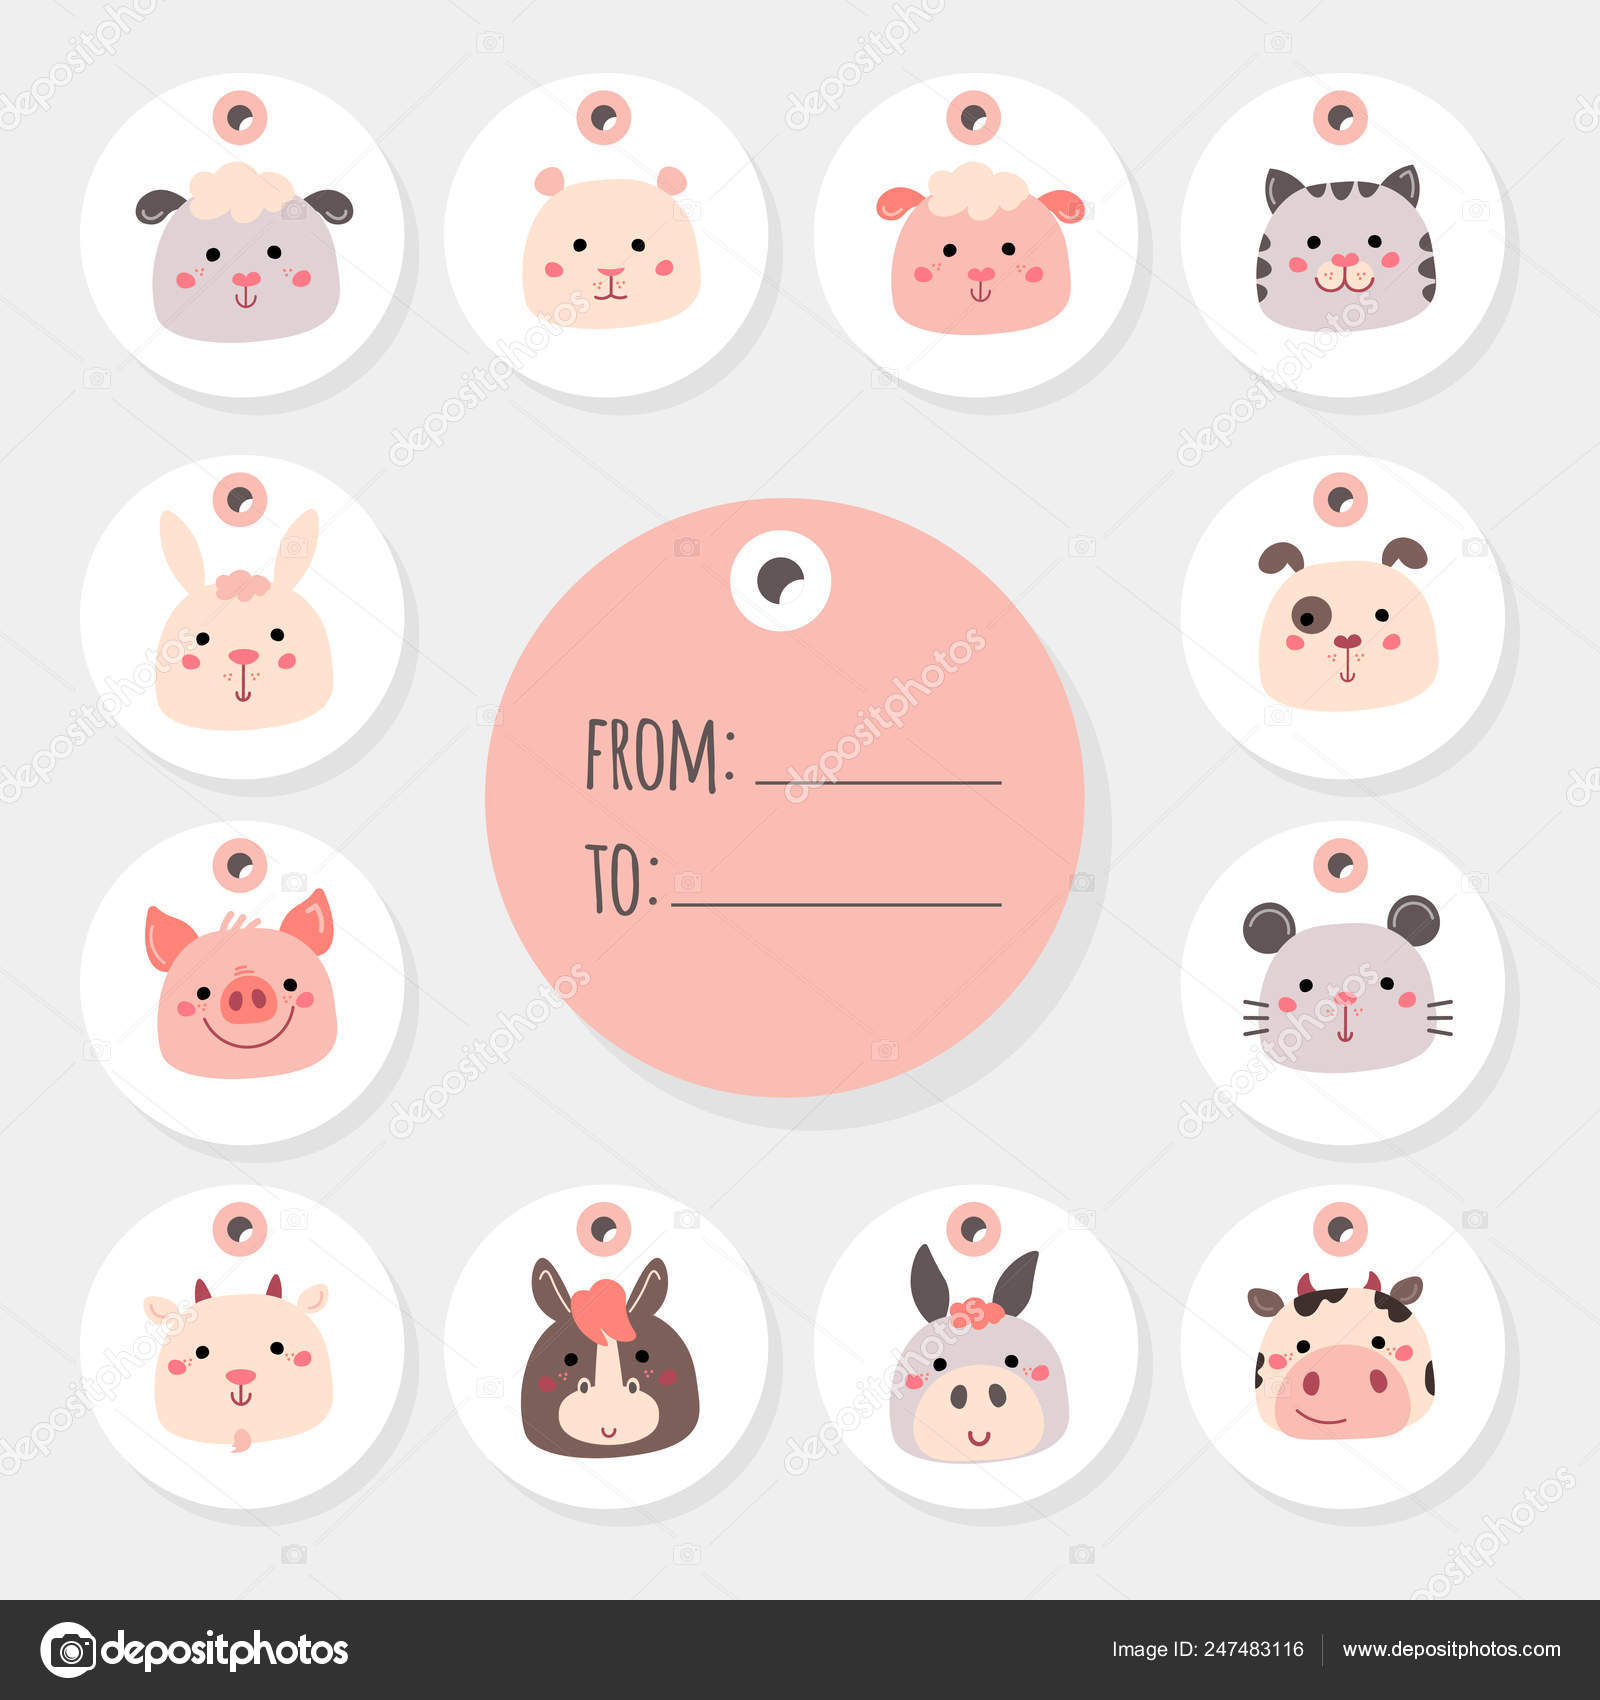 Great Set Vector Holiday Christmas s Cartoon Characters Sheep Hamster Vector Image By C A Compot Vector Stock